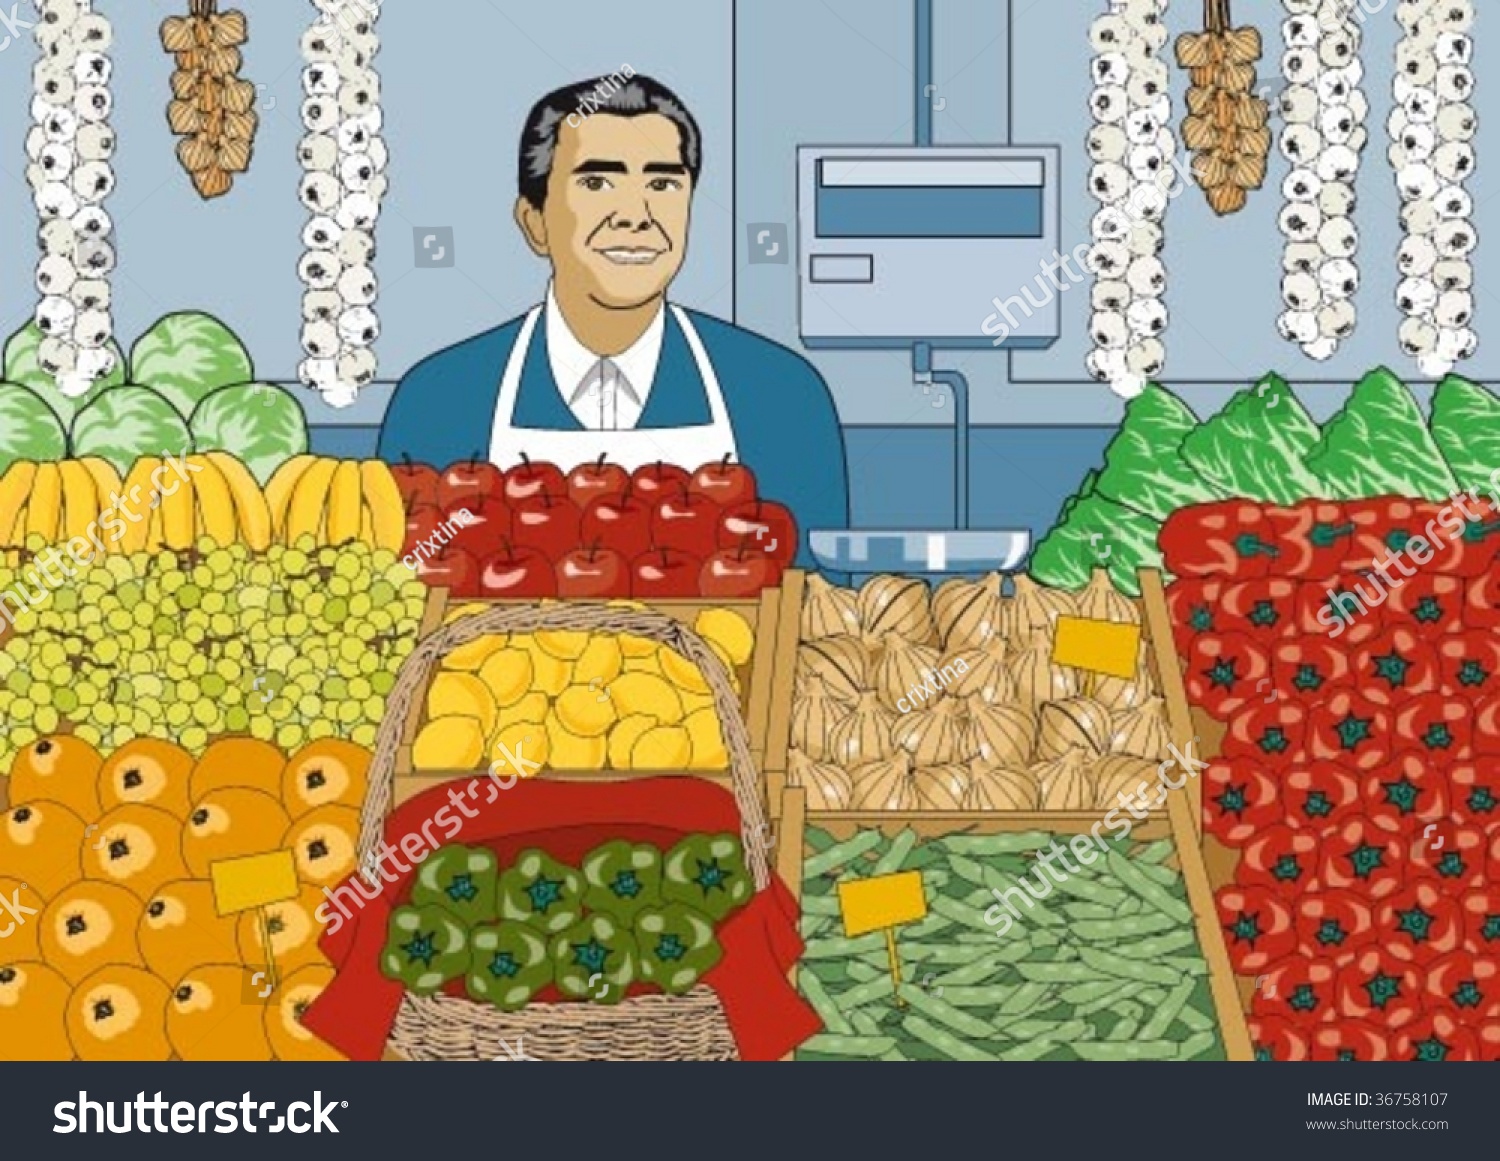 greengrocer clipart - photo #7